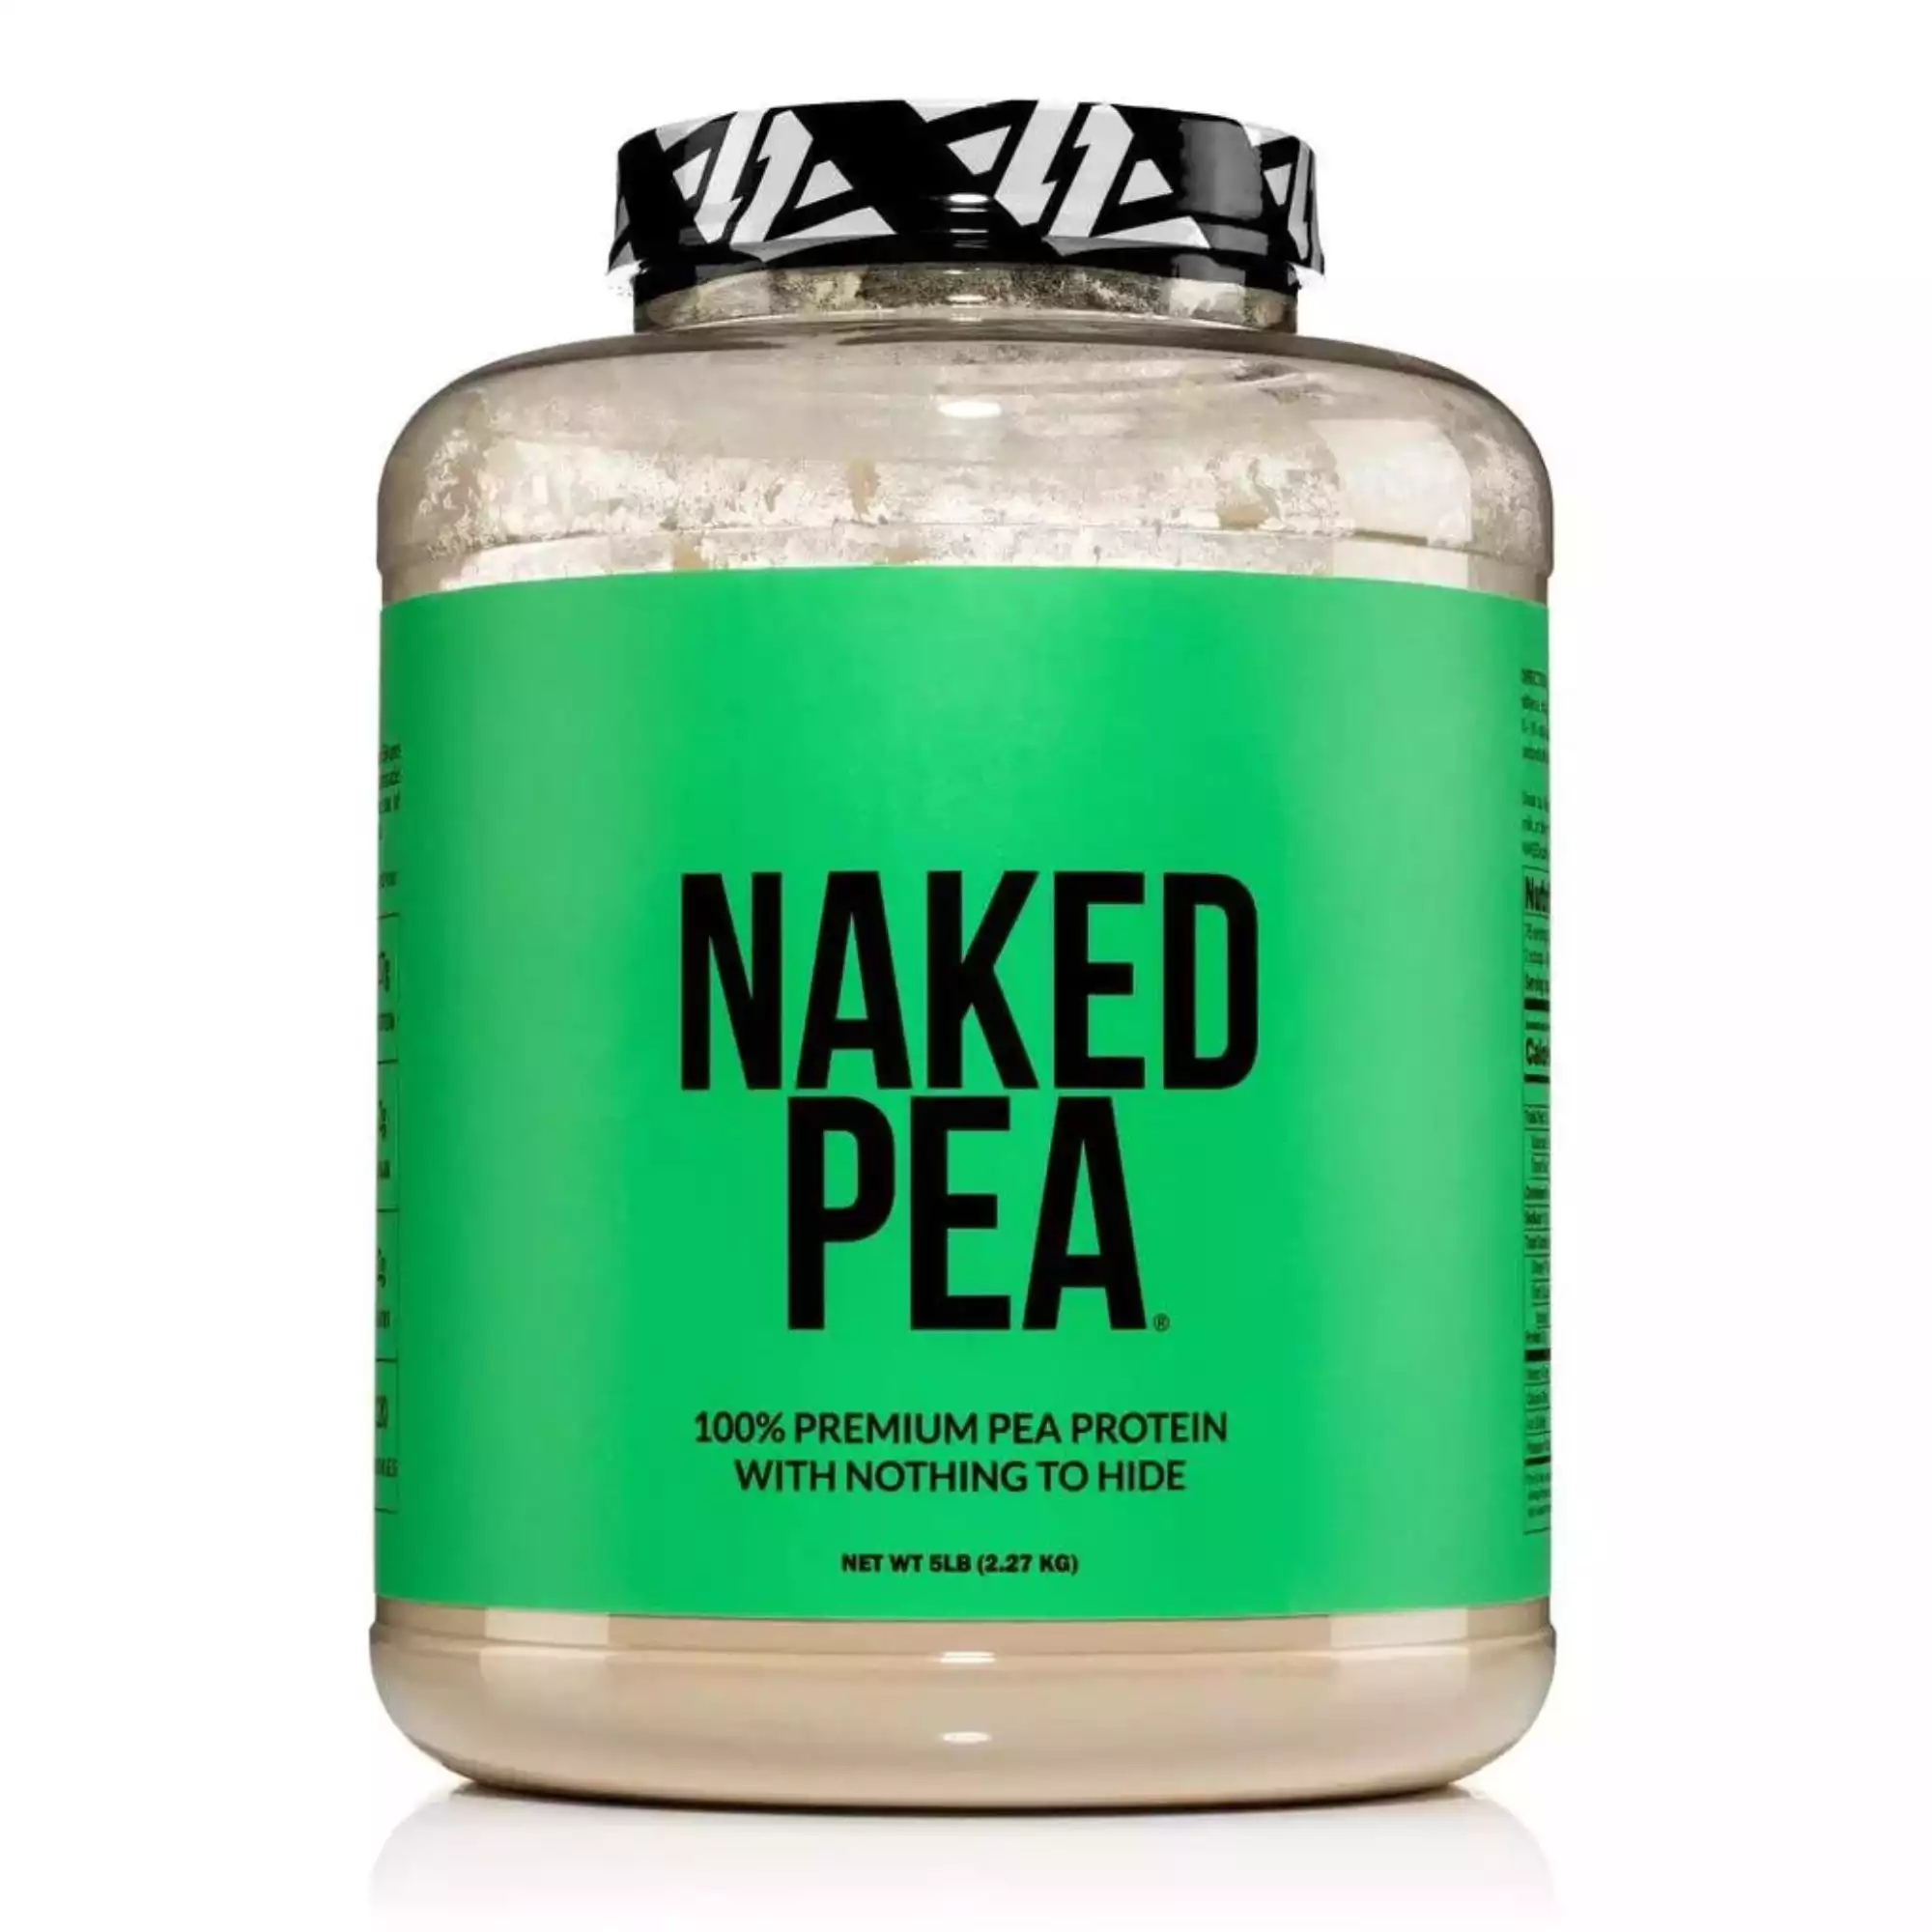 naked pea protein - The Best Pea Protein Powder of 2023, According to a Registered Dietitian